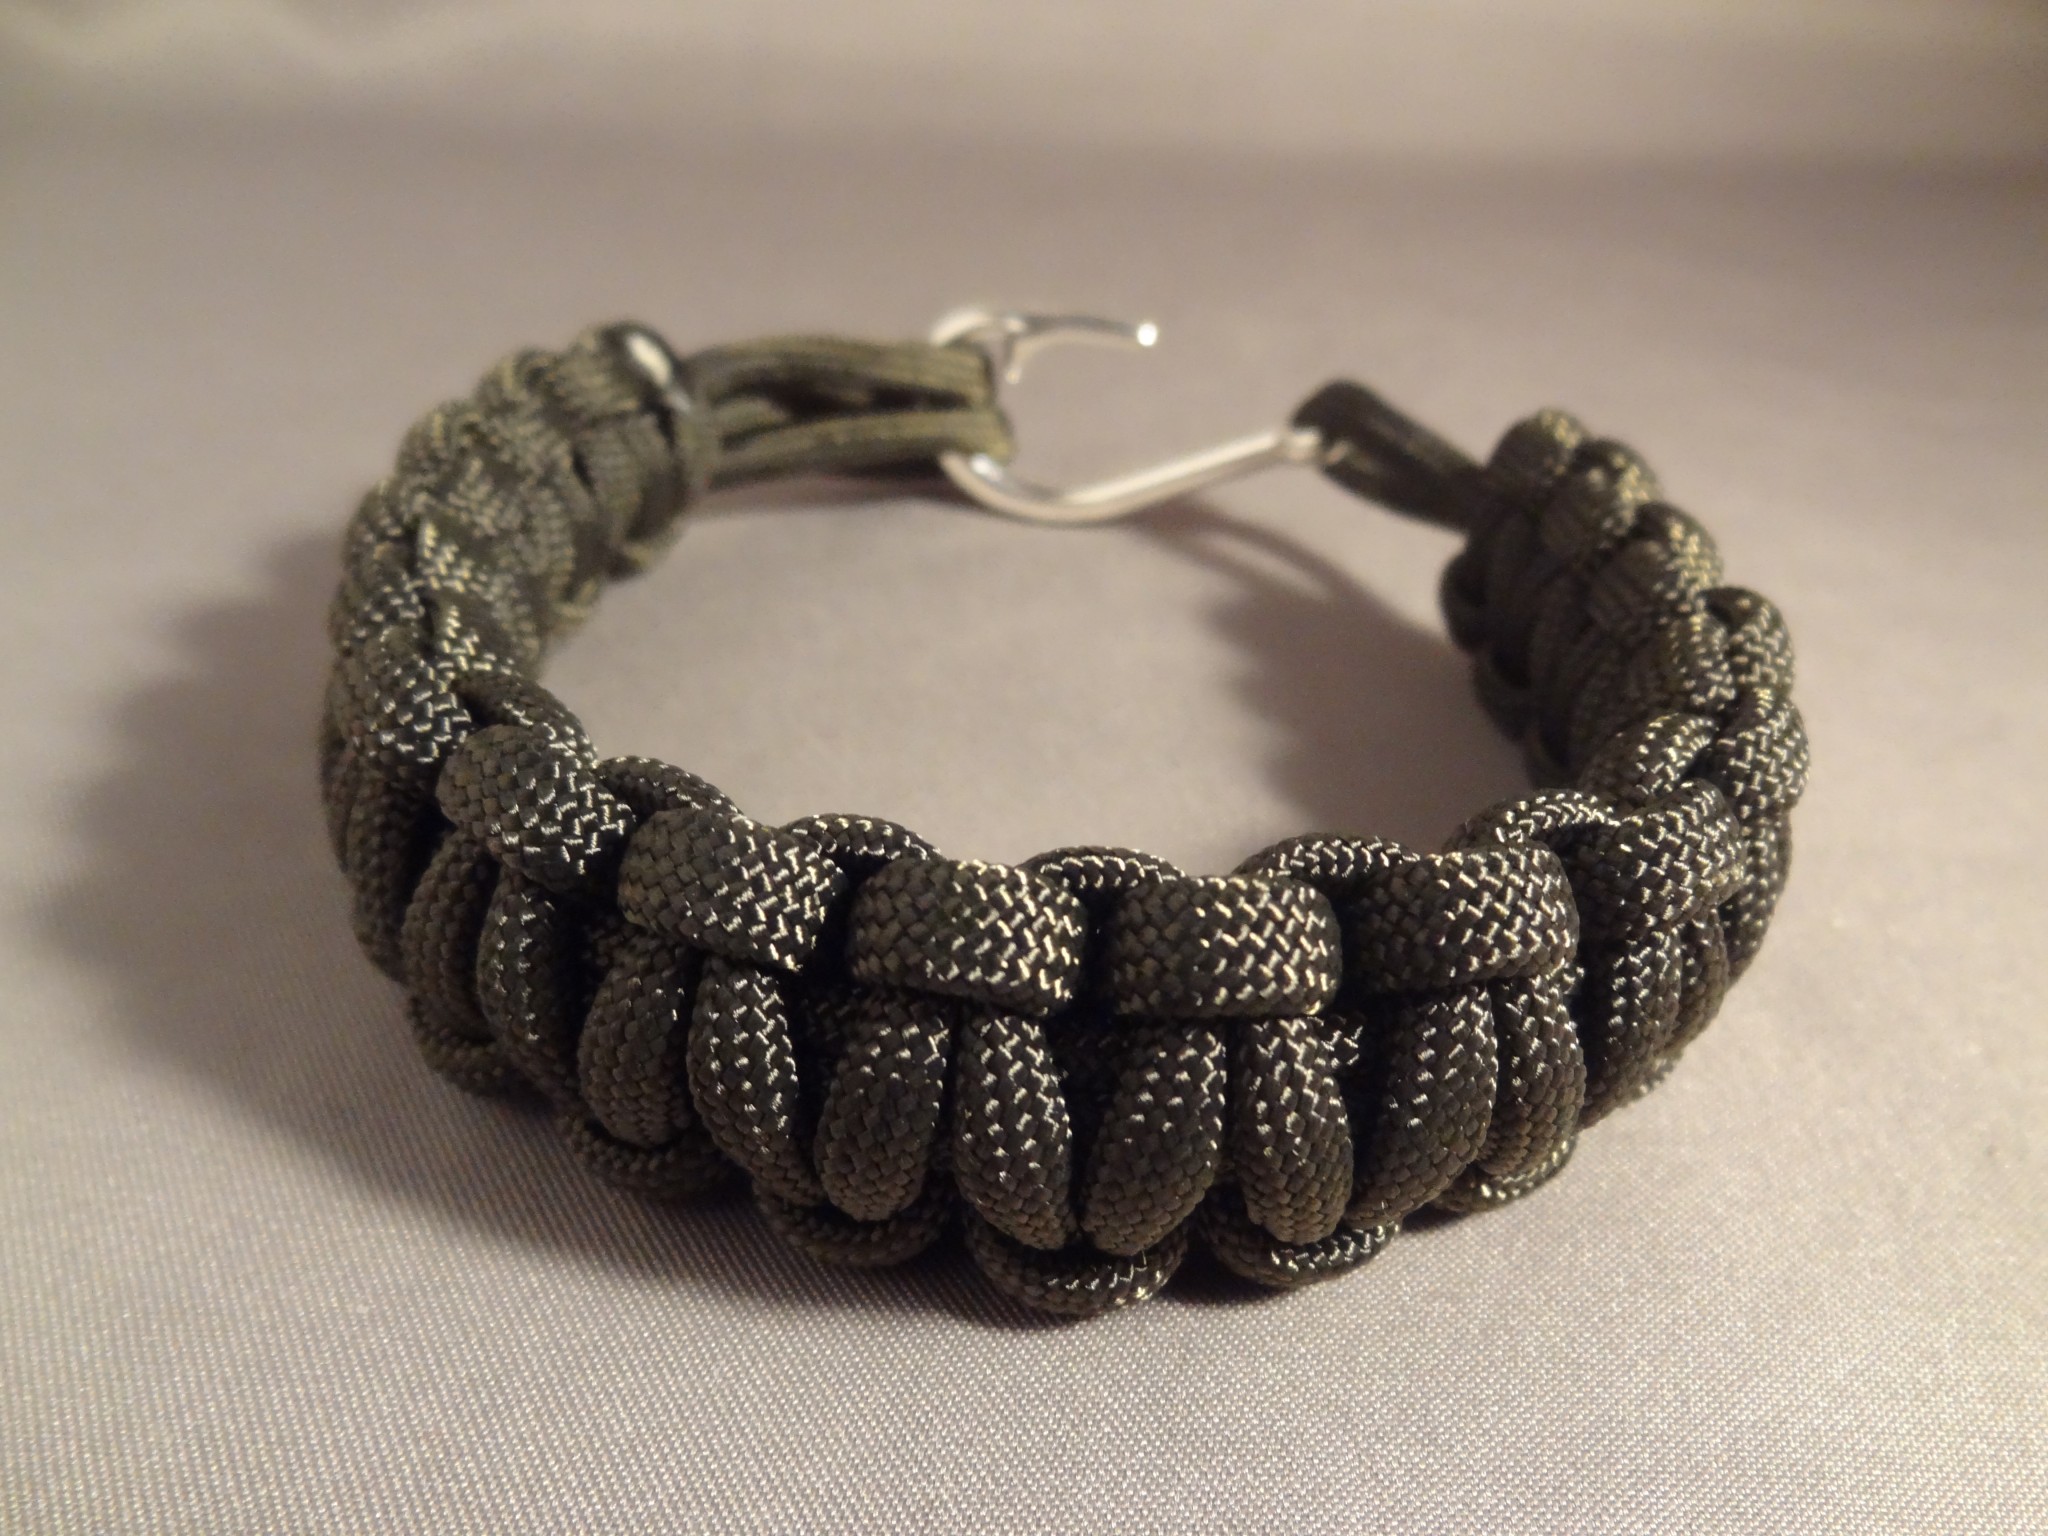 ParaCare 'Skinny' Survival Bracelet or Anklet with Silver Aluminum Hook  Clasp